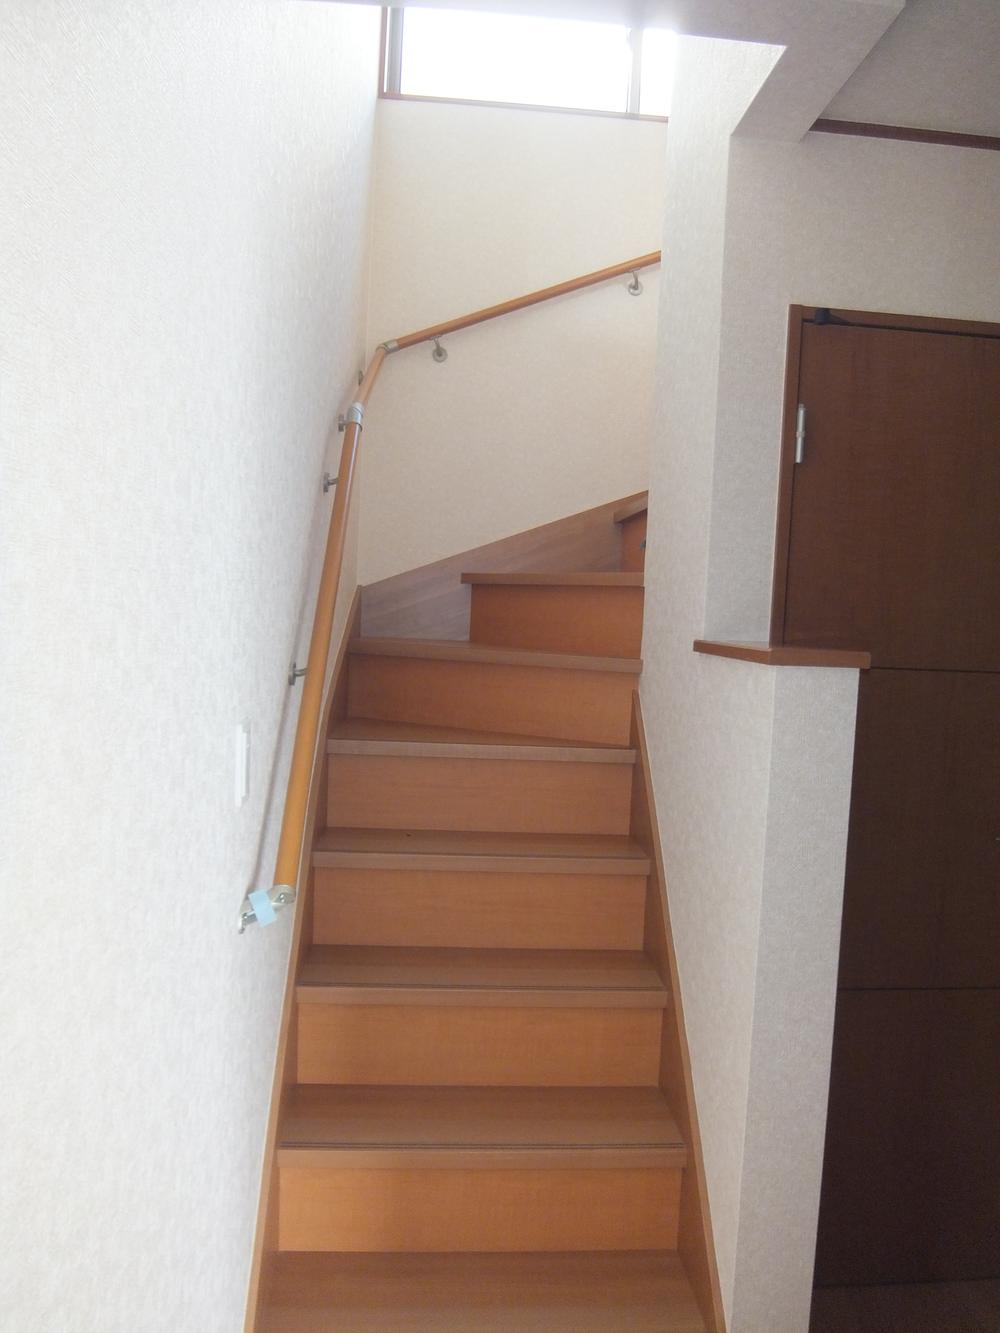 Other introspection. Example of construction (handrail ・ Staircase with window)